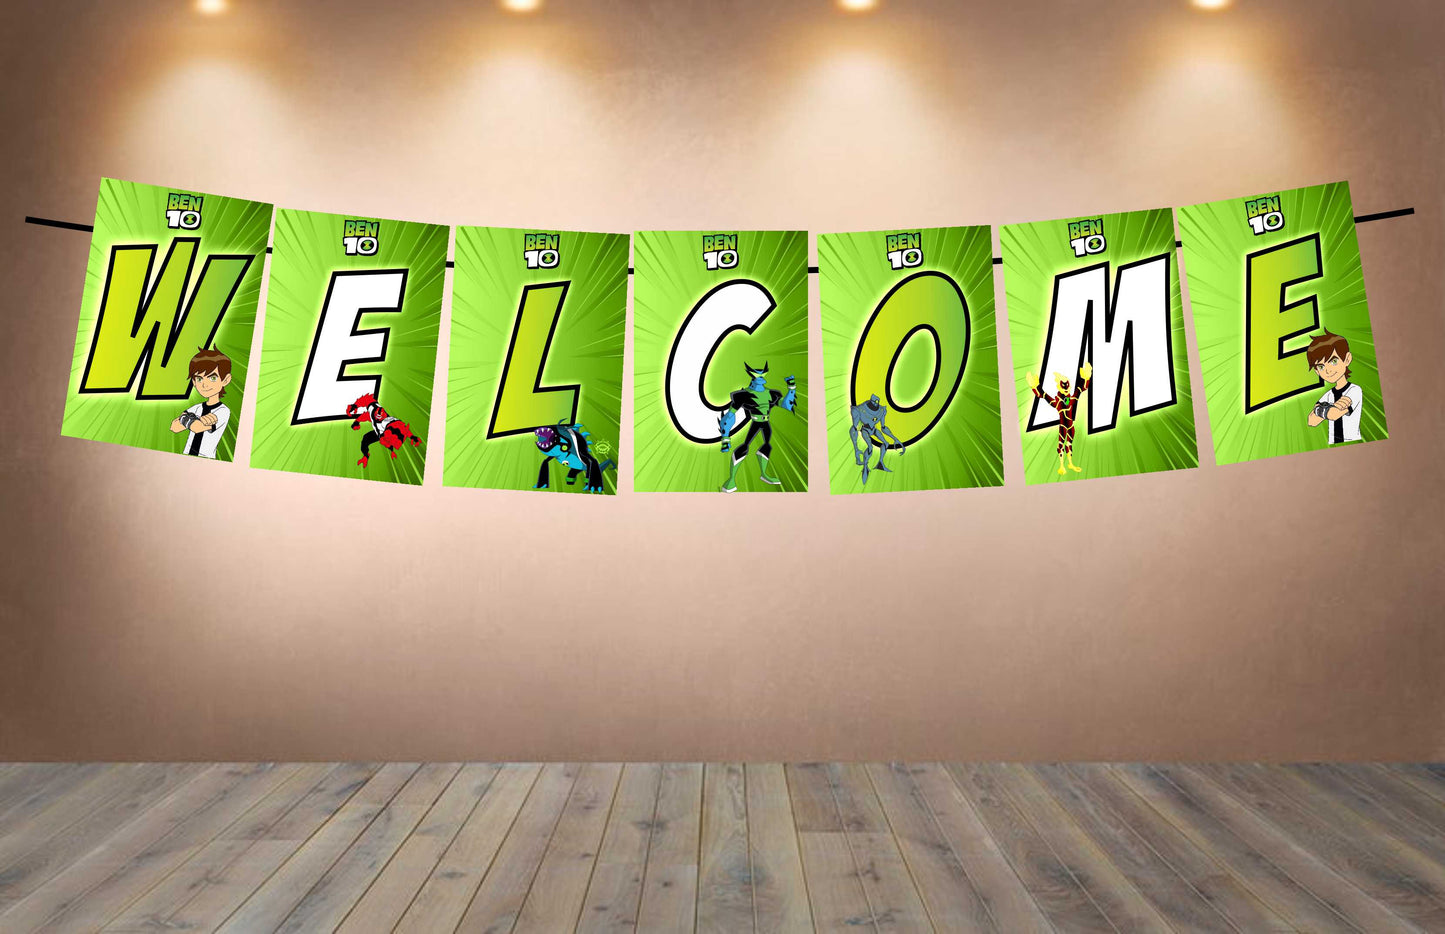 Ben10 Welcome Banner for Party Entrance Home Welcoming Birthday Decoration Party Item